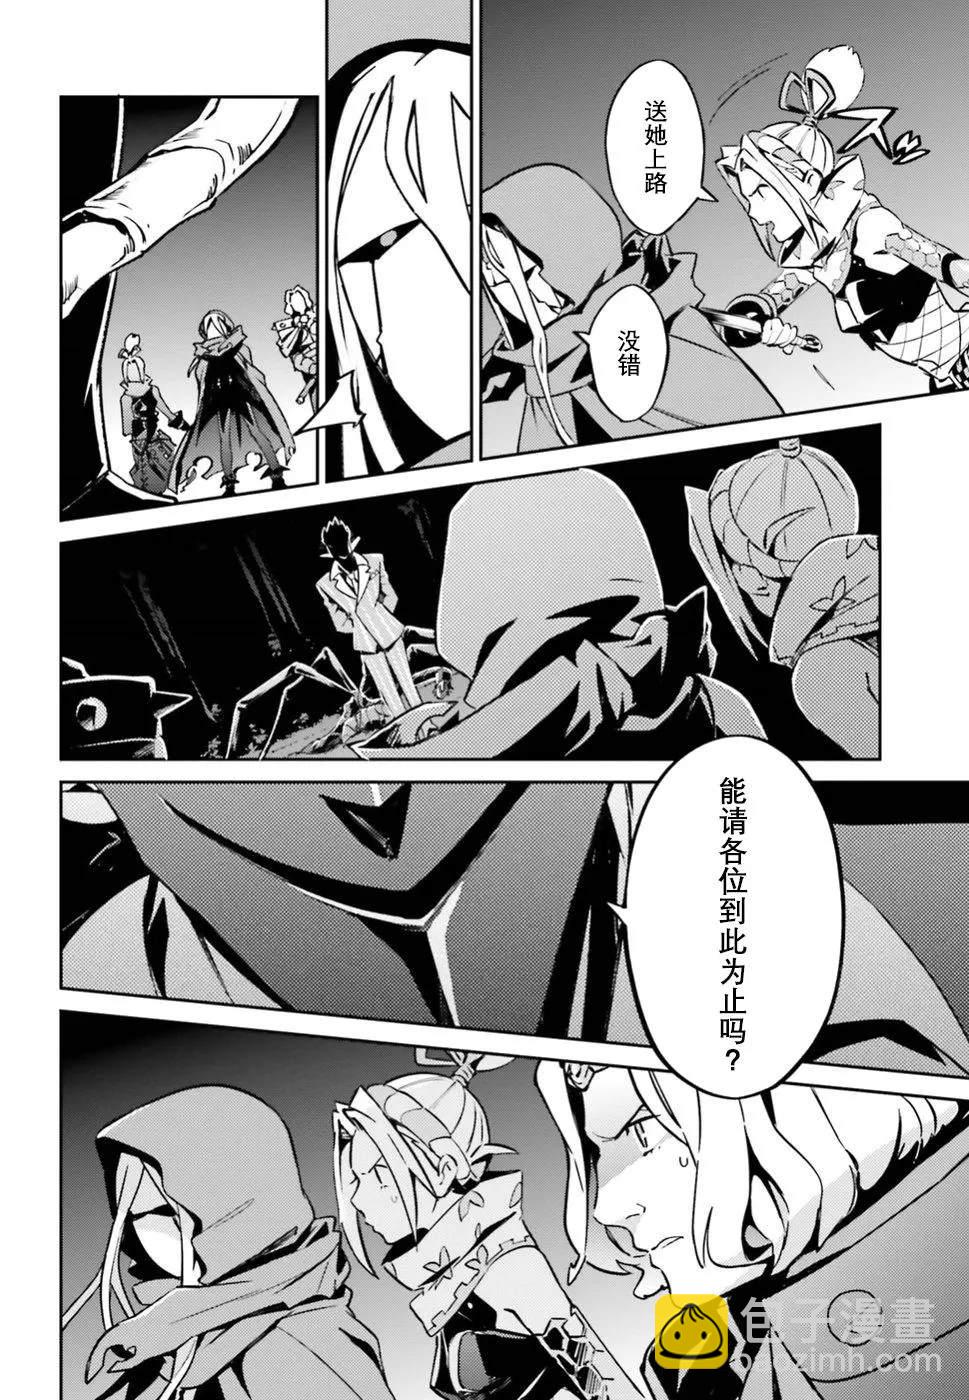 OVERLORD - 第46話 - 3